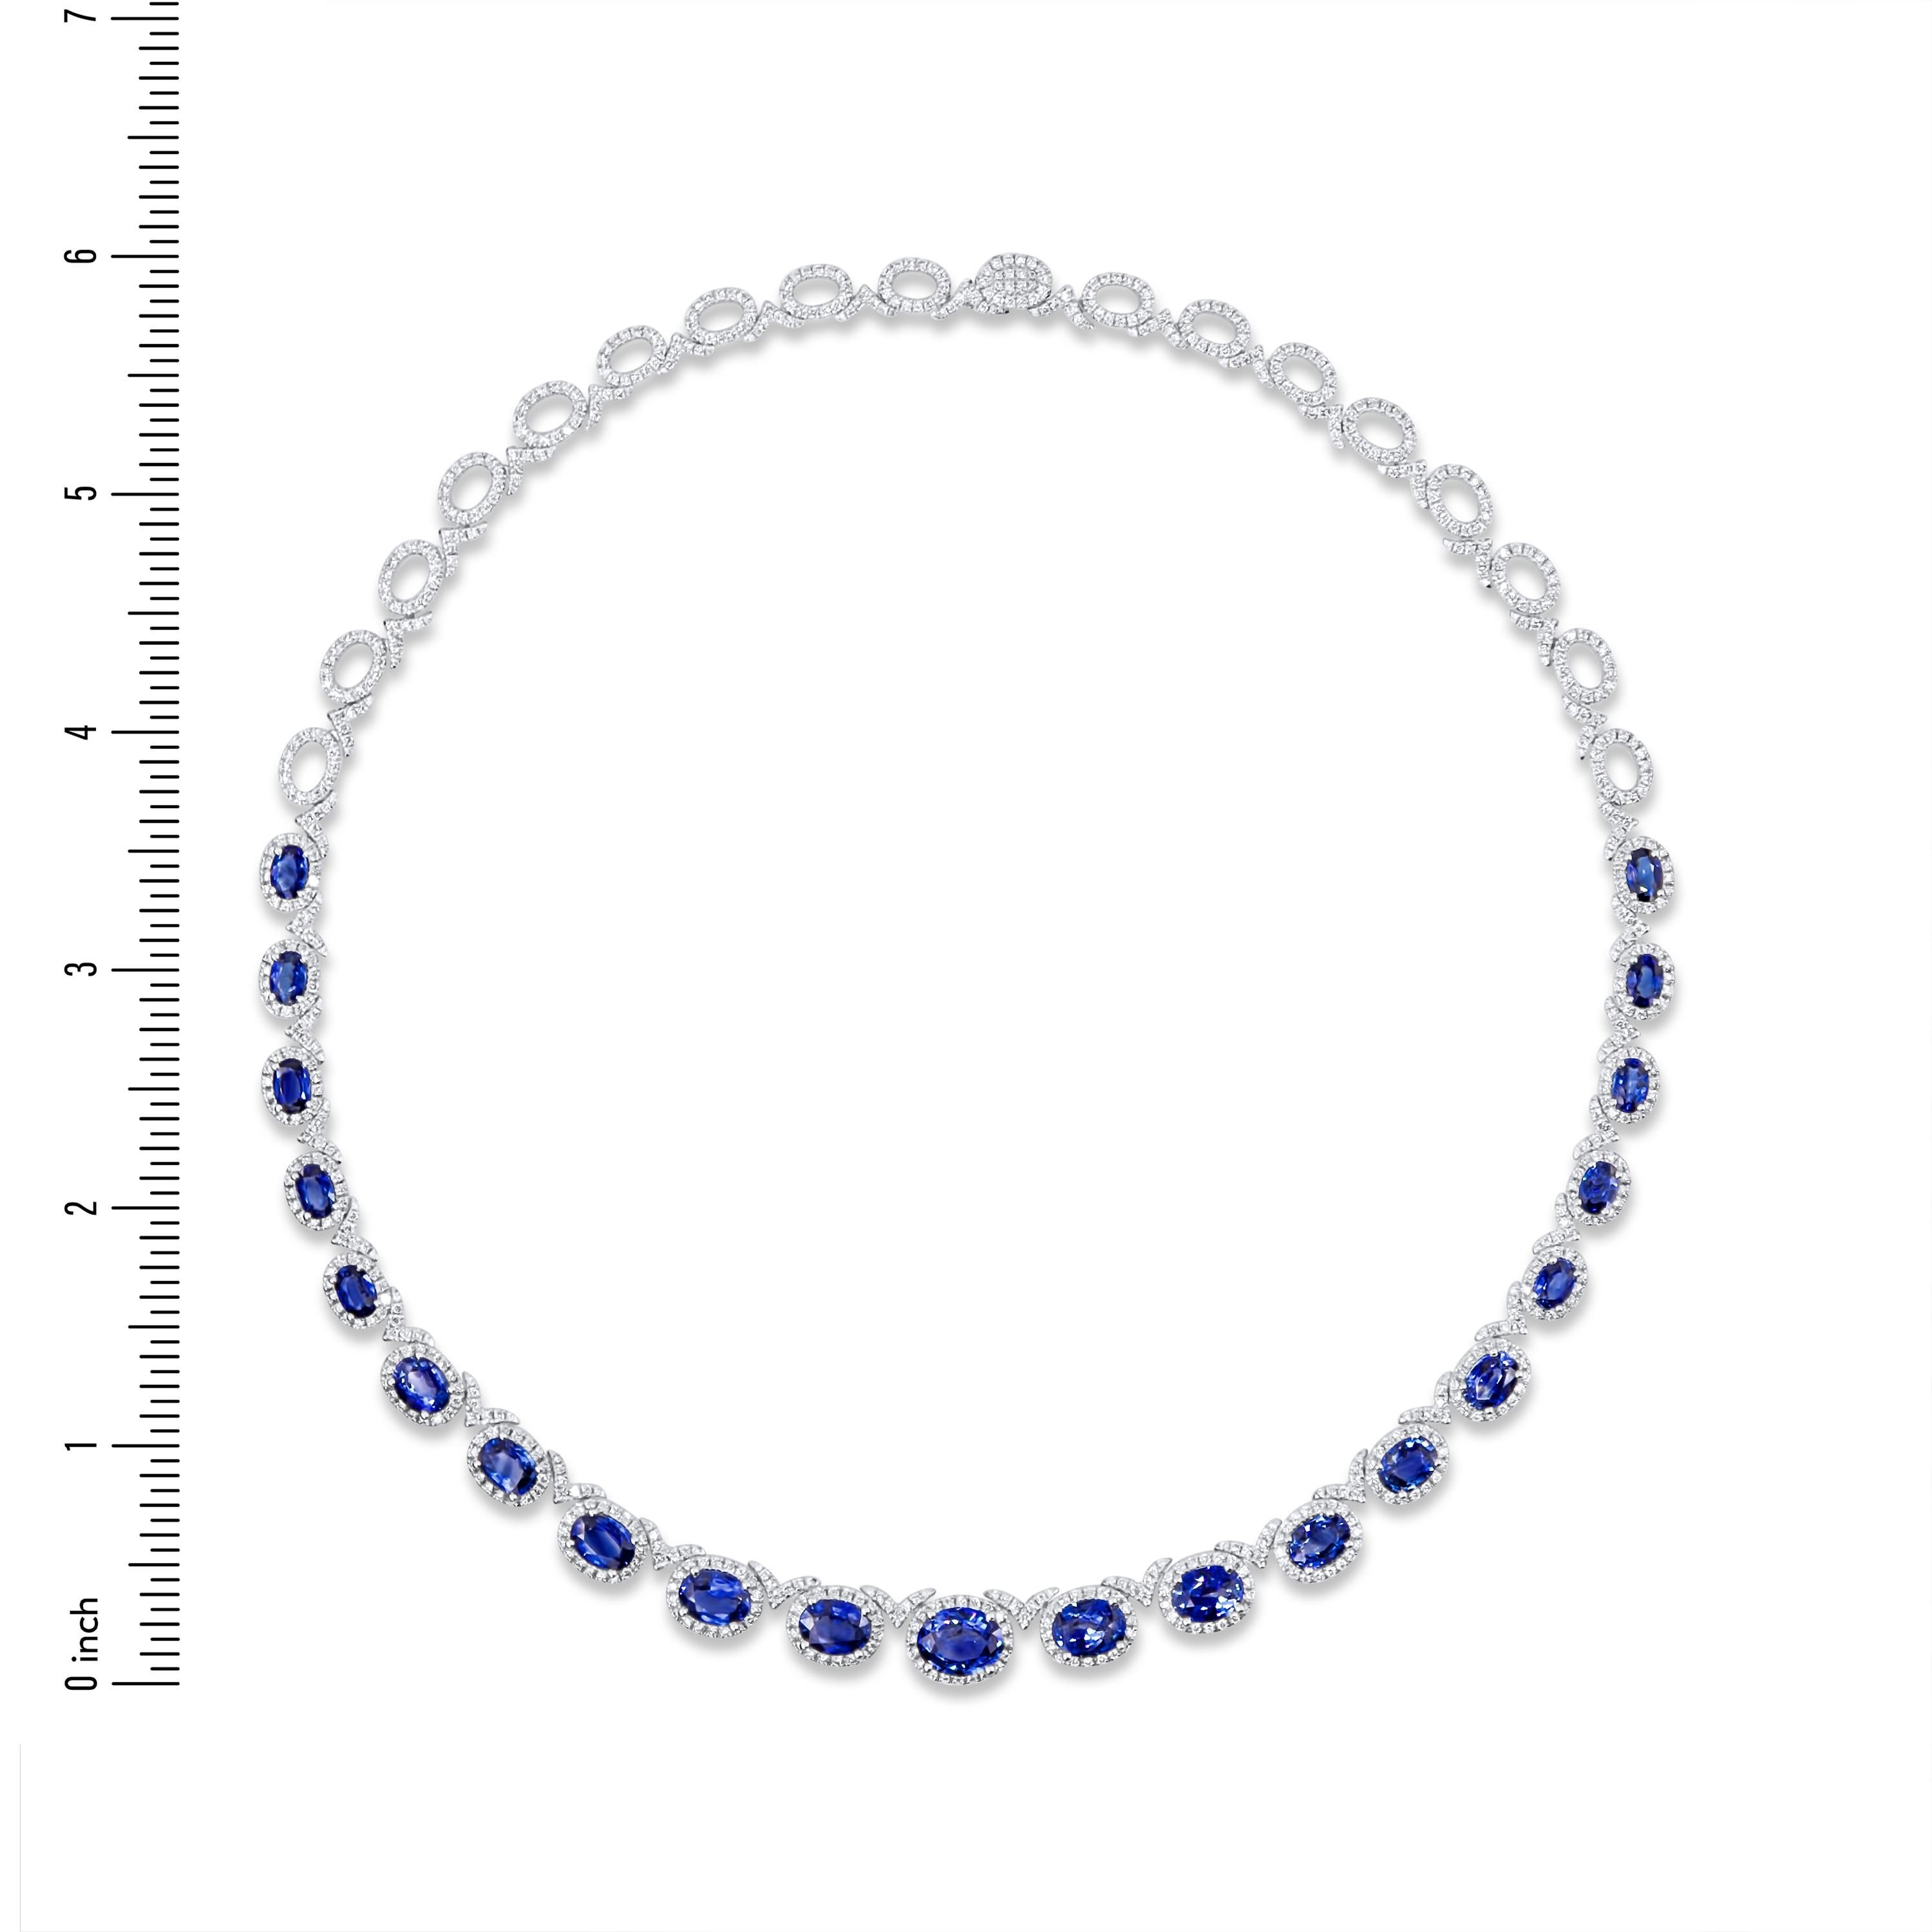 Contemporary 19.34 Ct Vivid Blue Oval Cut Sapphire and 5.65 Ct Diamond Necklace in 18W ref71 For Sale